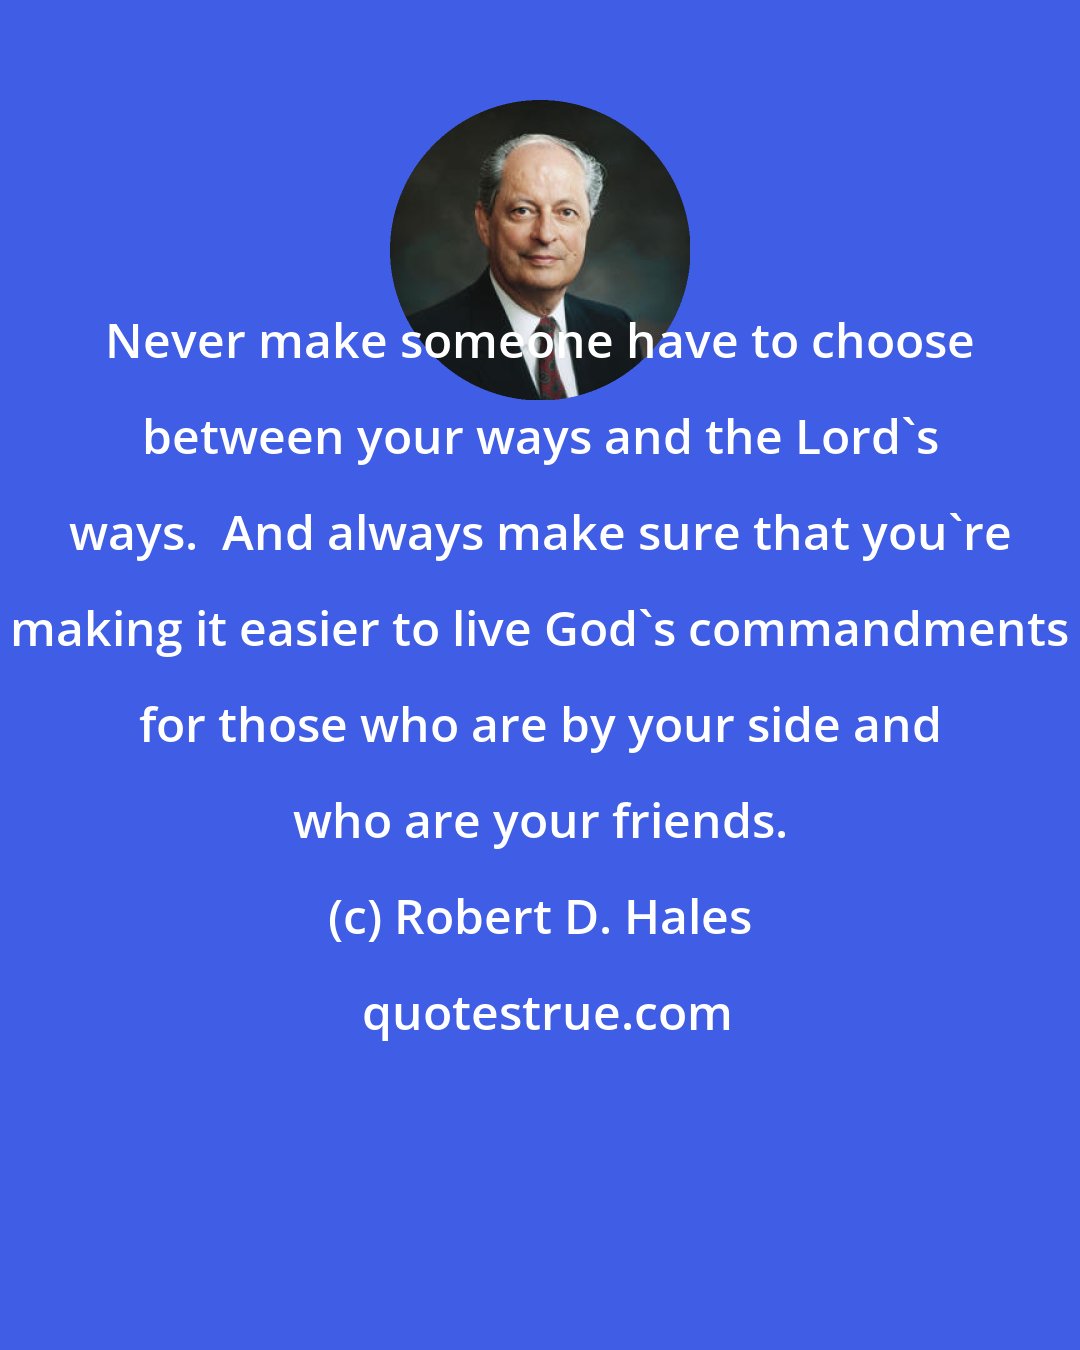 Robert D. Hales: Never make someone have to choose between your ways and the Lord's ways.  And always make sure that you're making it easier to live God's commandments for those who are by your side and who are your friends.